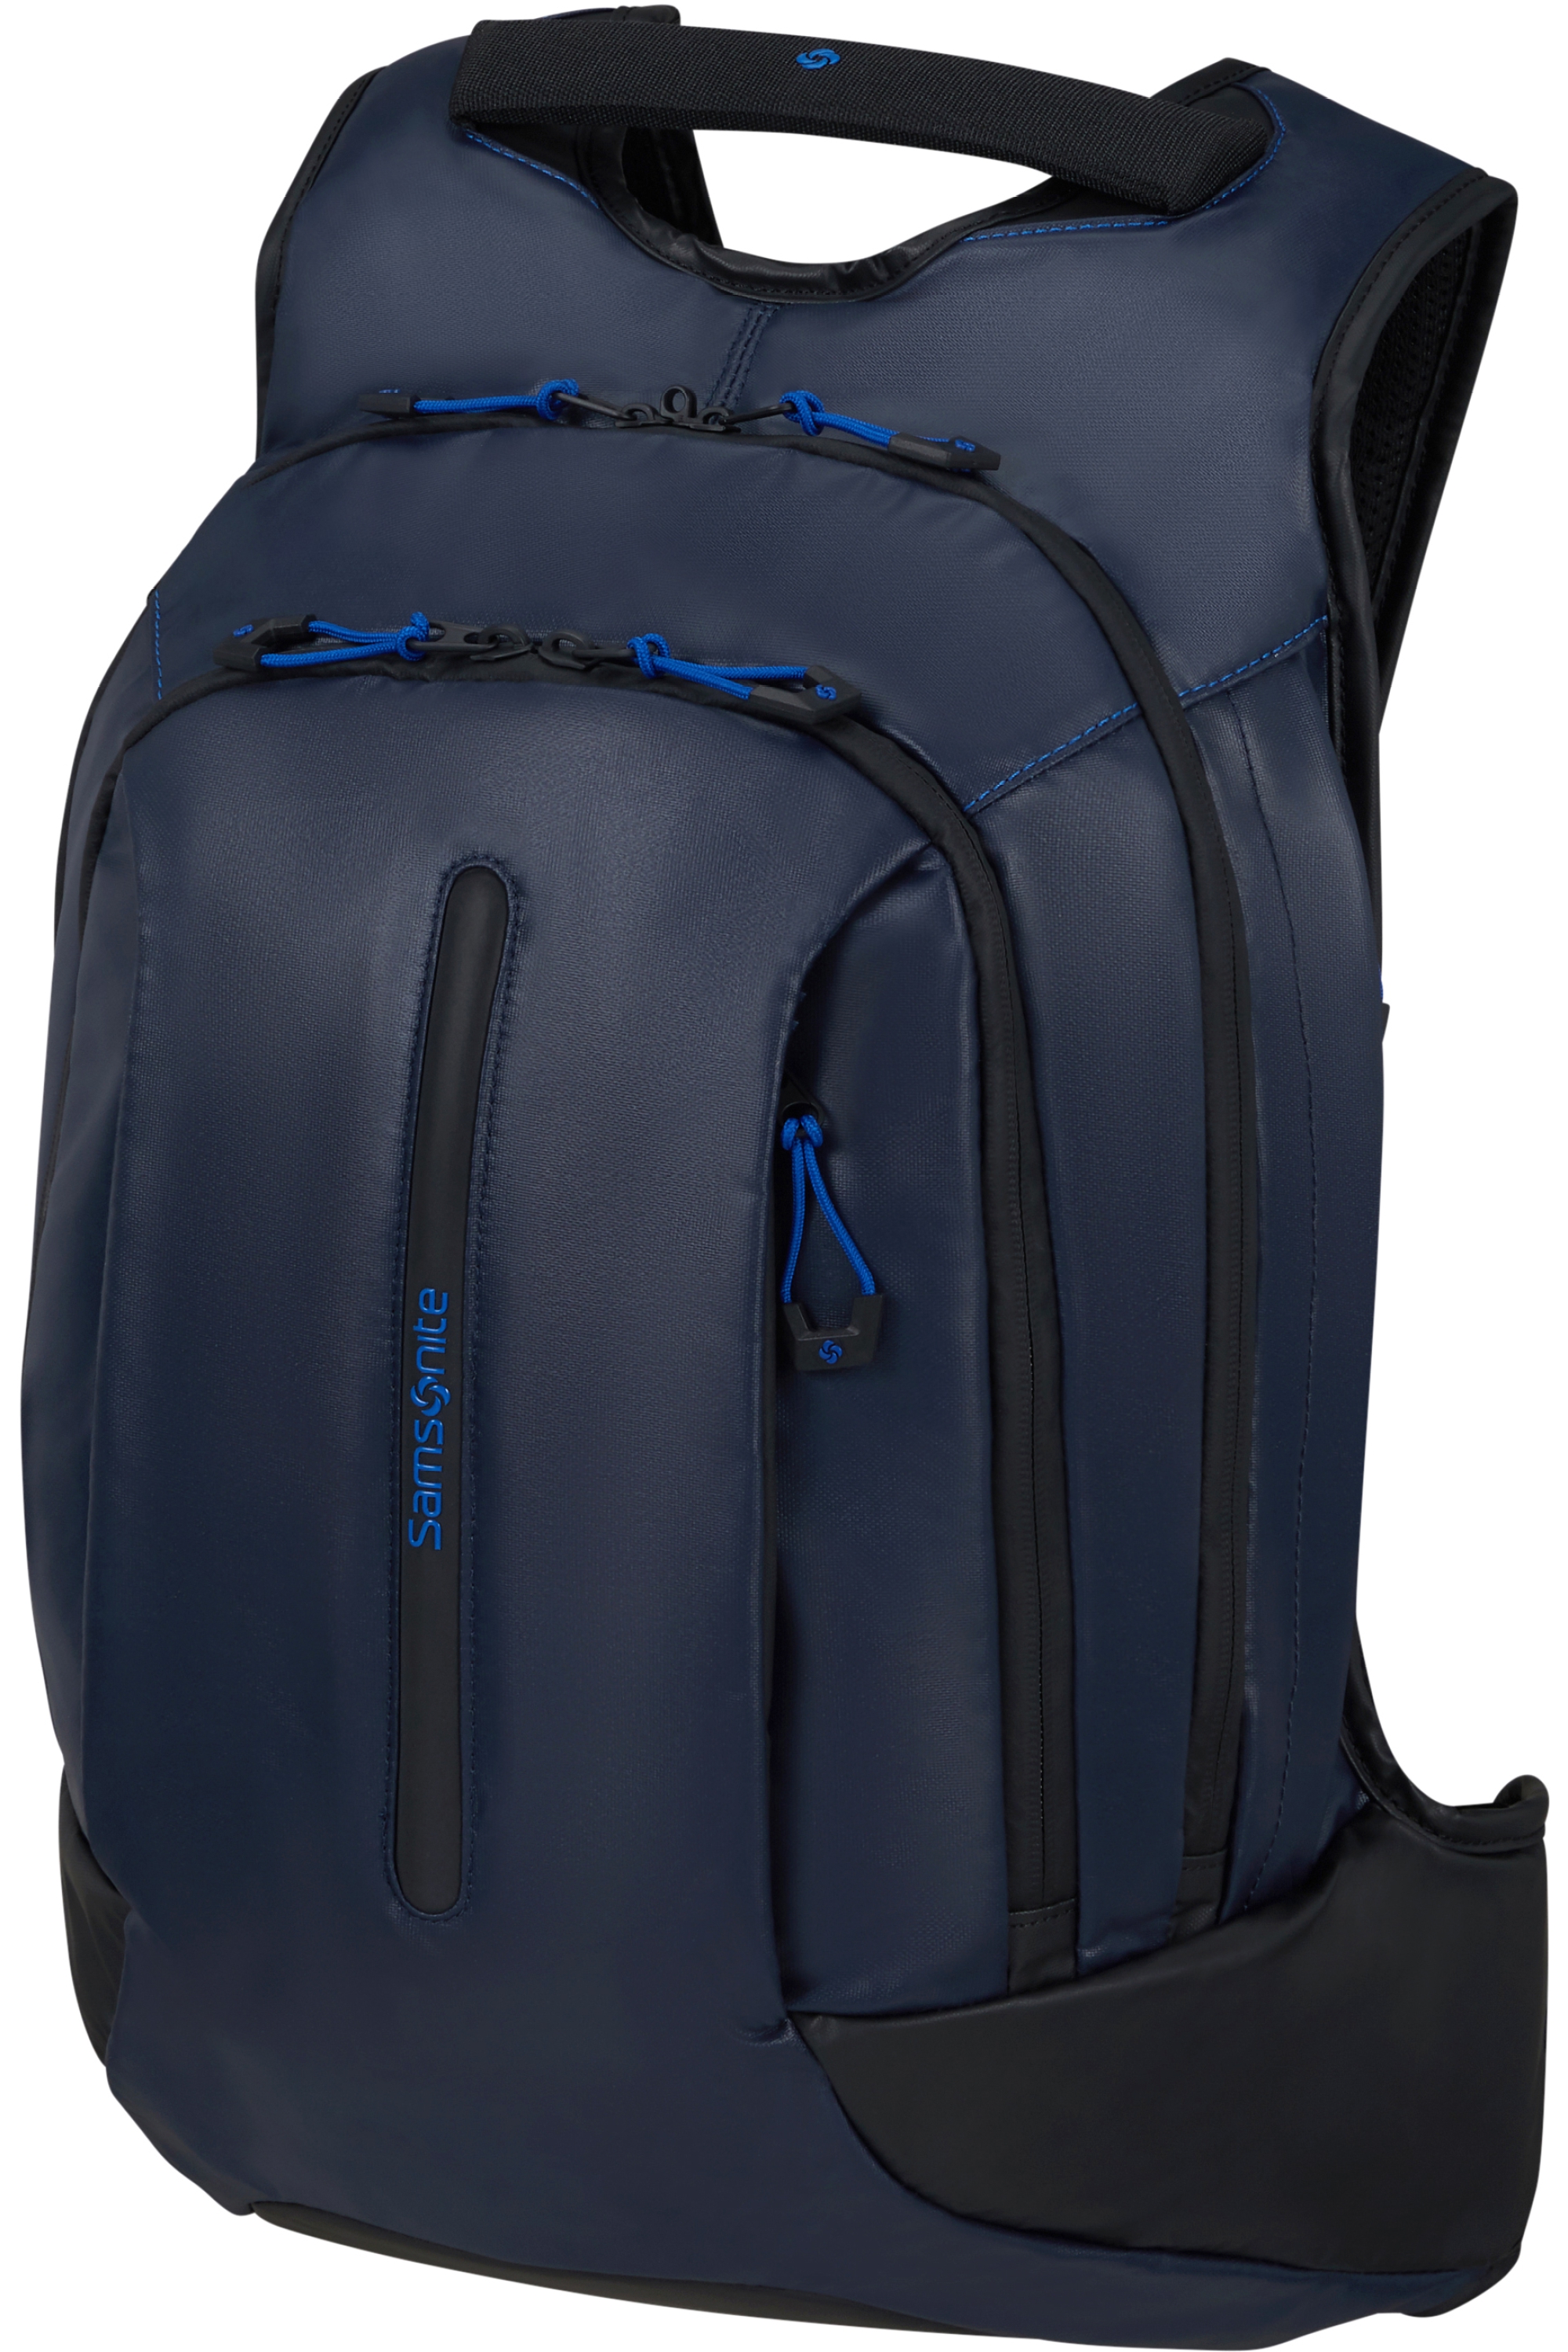 140871-2165-140871_2165_ecodiver_laptop_backpack_m_front34-72a08908-920a-4085-9daa-ae5b0102b270-png